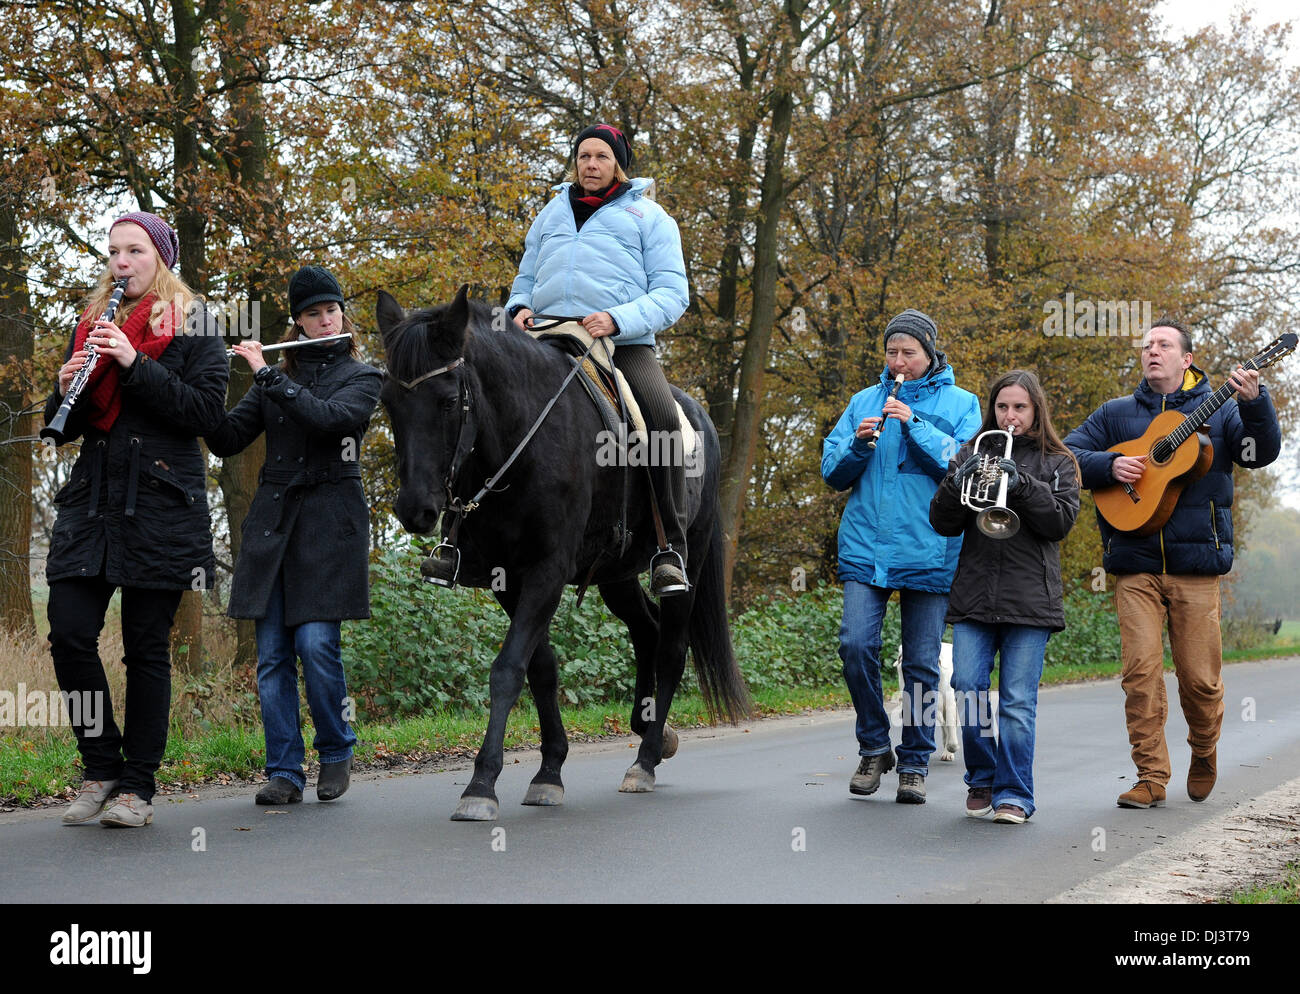 Martfeld, Germany. 16th Nov, 2013. The course director Gwendolyn Schubert (2-L) plays on her flute to the beat of the hooves of the horse 'Jemala' wich is ridden by Dagmar Fuchs as well as Kristin Mielke on the fipple pipe (3-L), Kim Dinter on the trumpet, Stephanie Schmidt on the clarinet and Udo Schneider on the guitar follow the beat in Martfeld, Germany, 16 November 2013. The course shows musicians how to follow the beat of the gait of a horse, which then can be considers as a conductor. Photo: Ingo Wagner/dpa/Alamy Live News Stock Photo